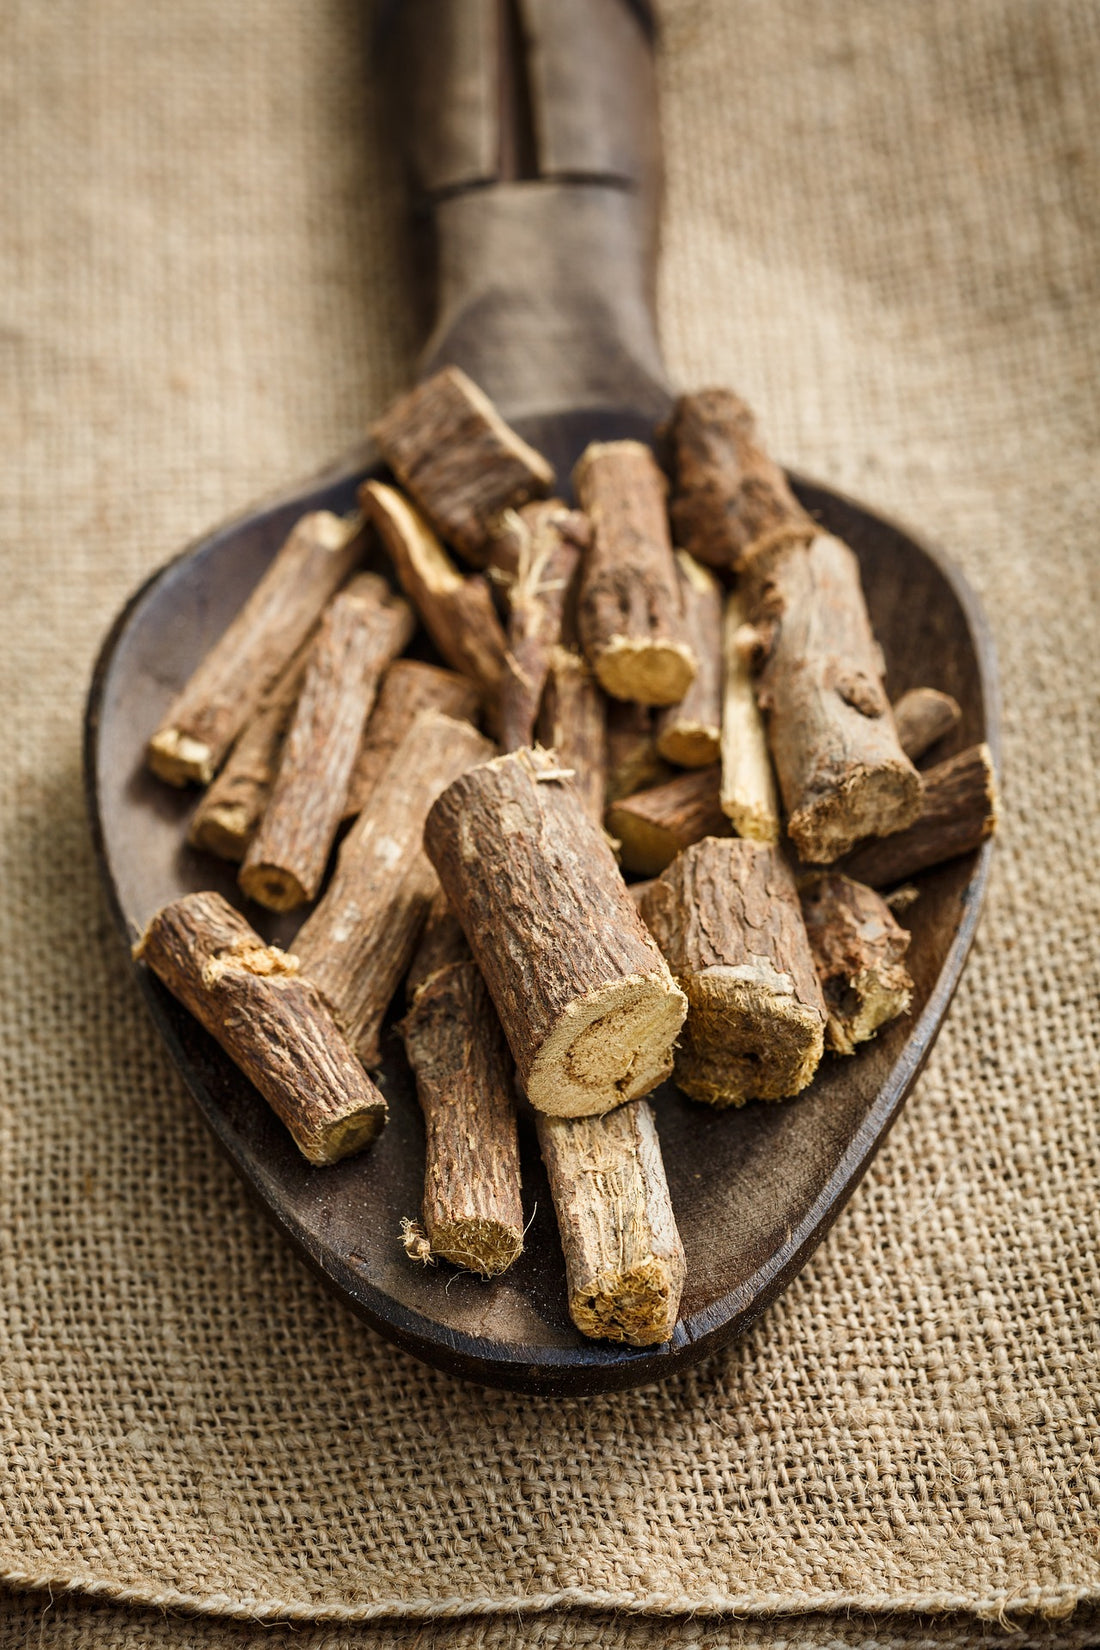 Licorice: The Remedy for Adrenals, Digestion & Immune Support